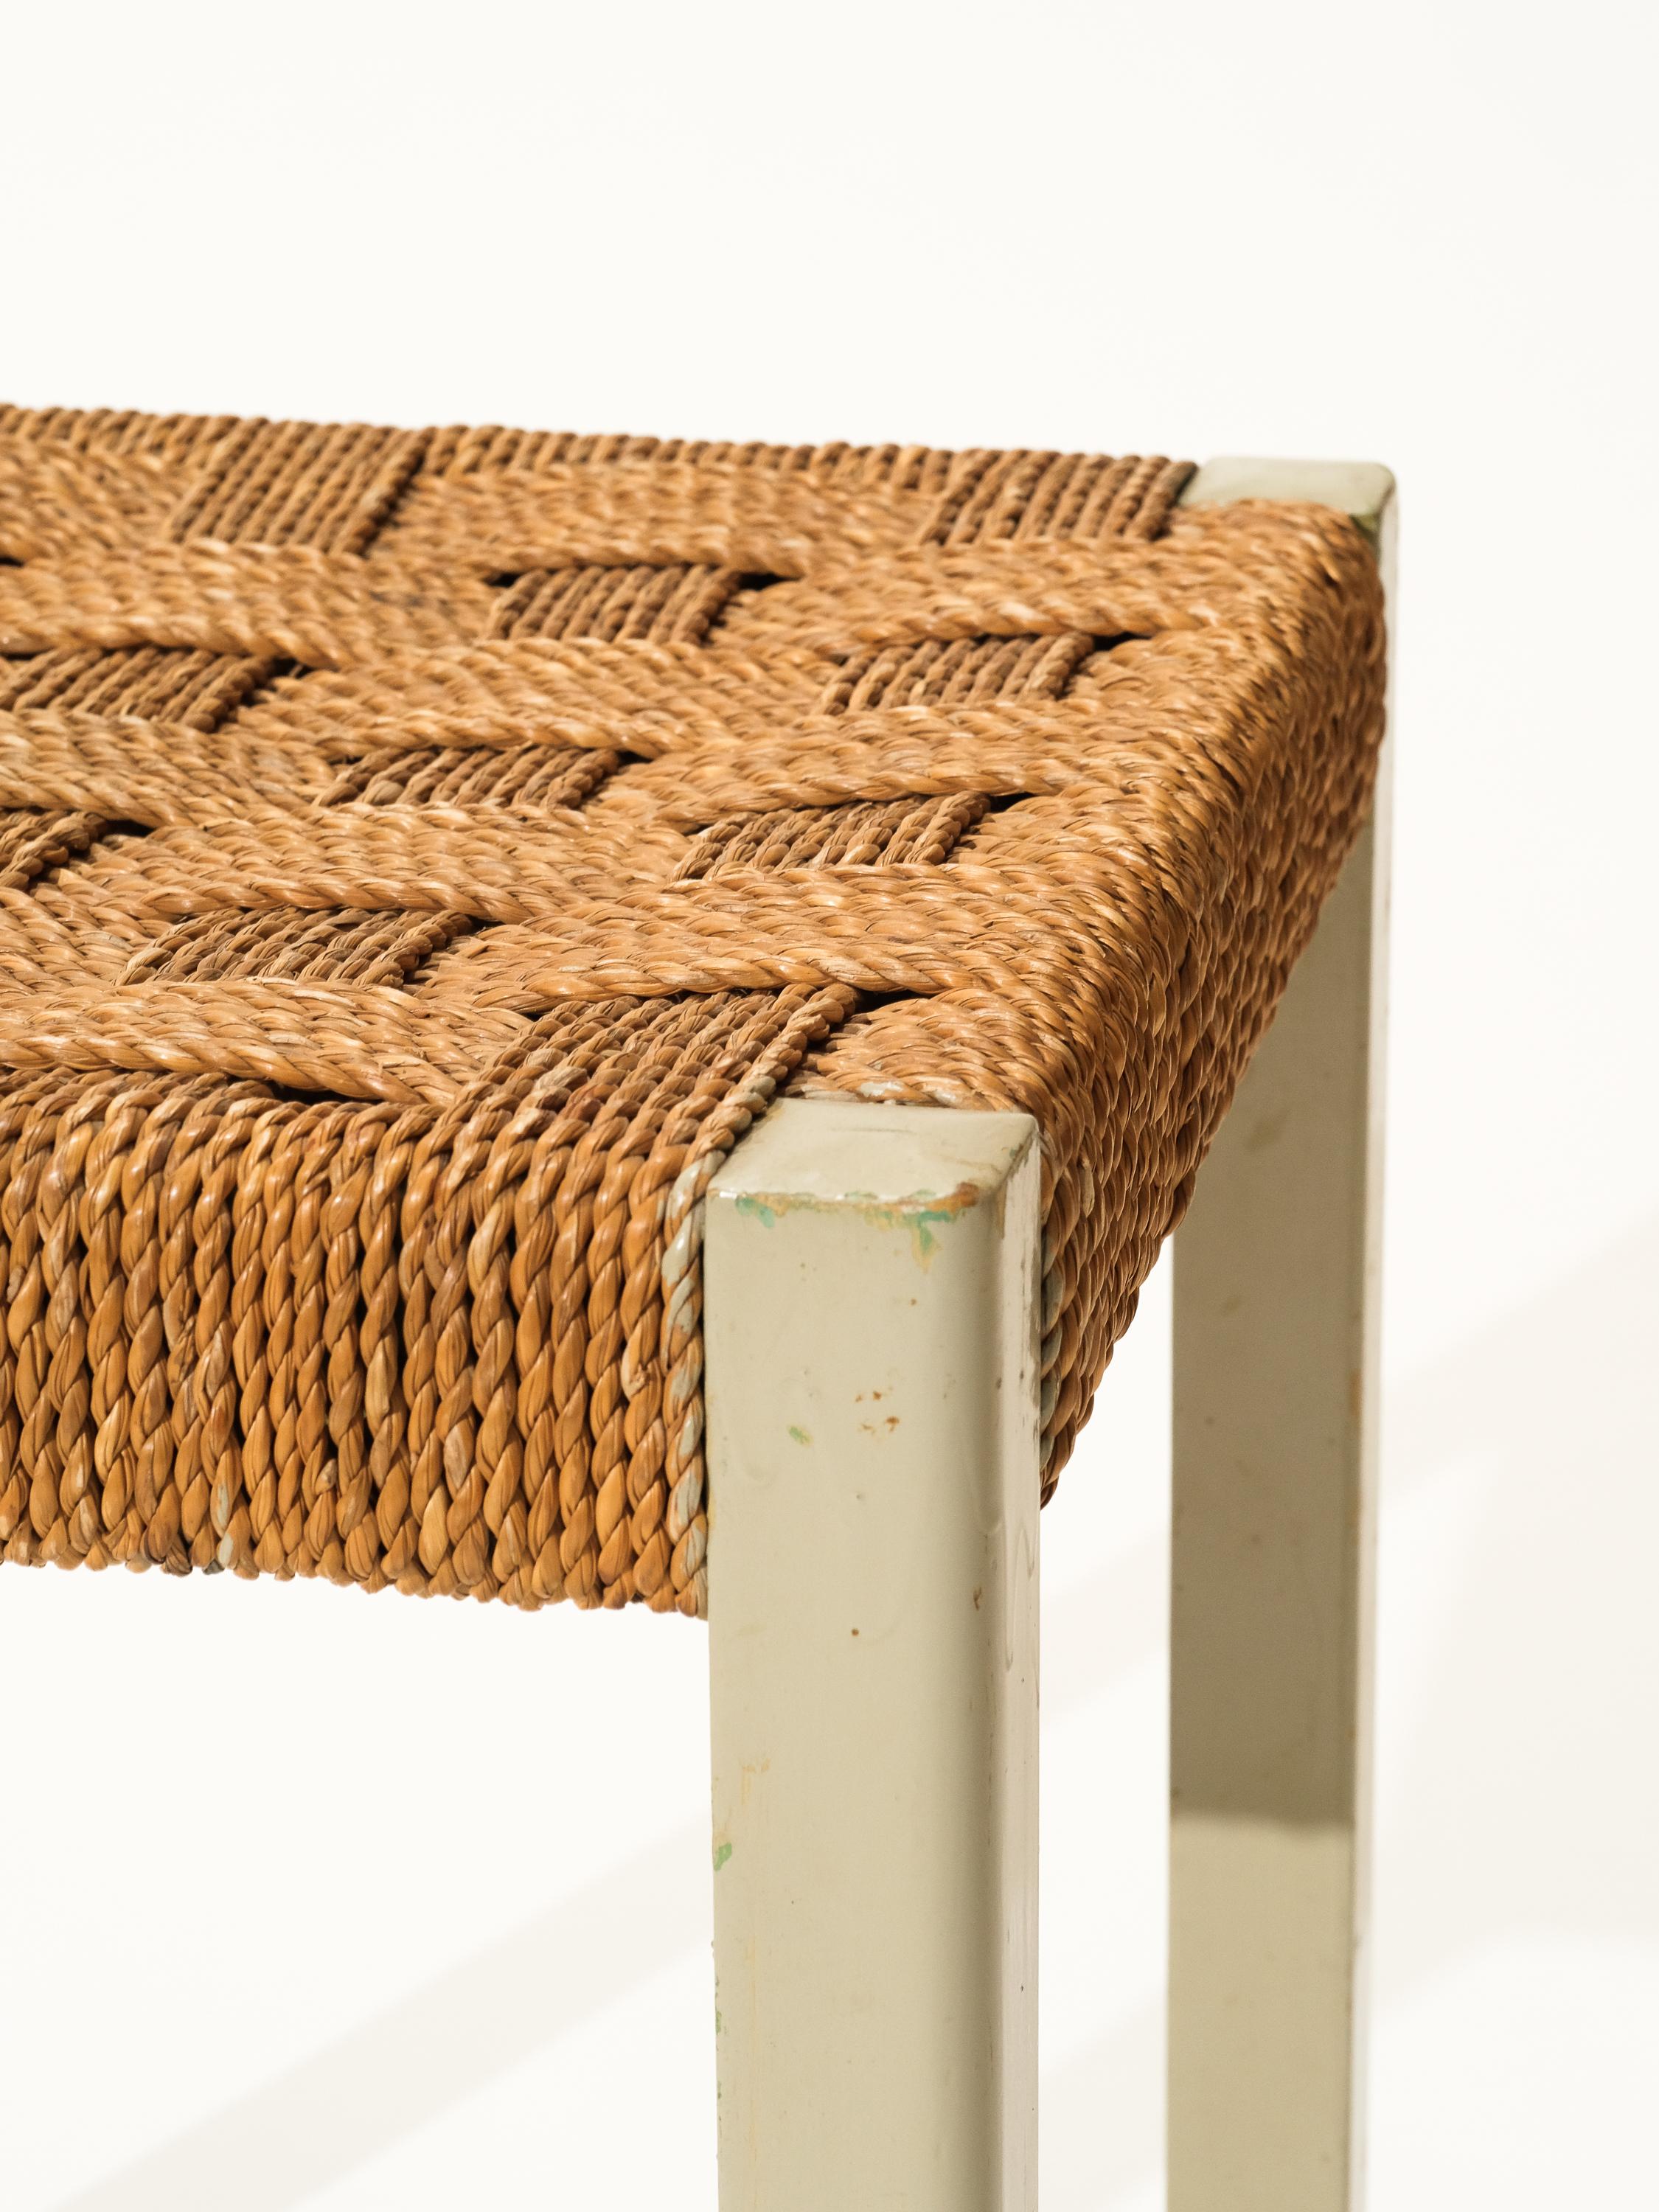 Mid-20th Century Woven Seagrass and Painted Wood Stool by Axel Larsson for Gemla, Sweden, 1940s For Sale